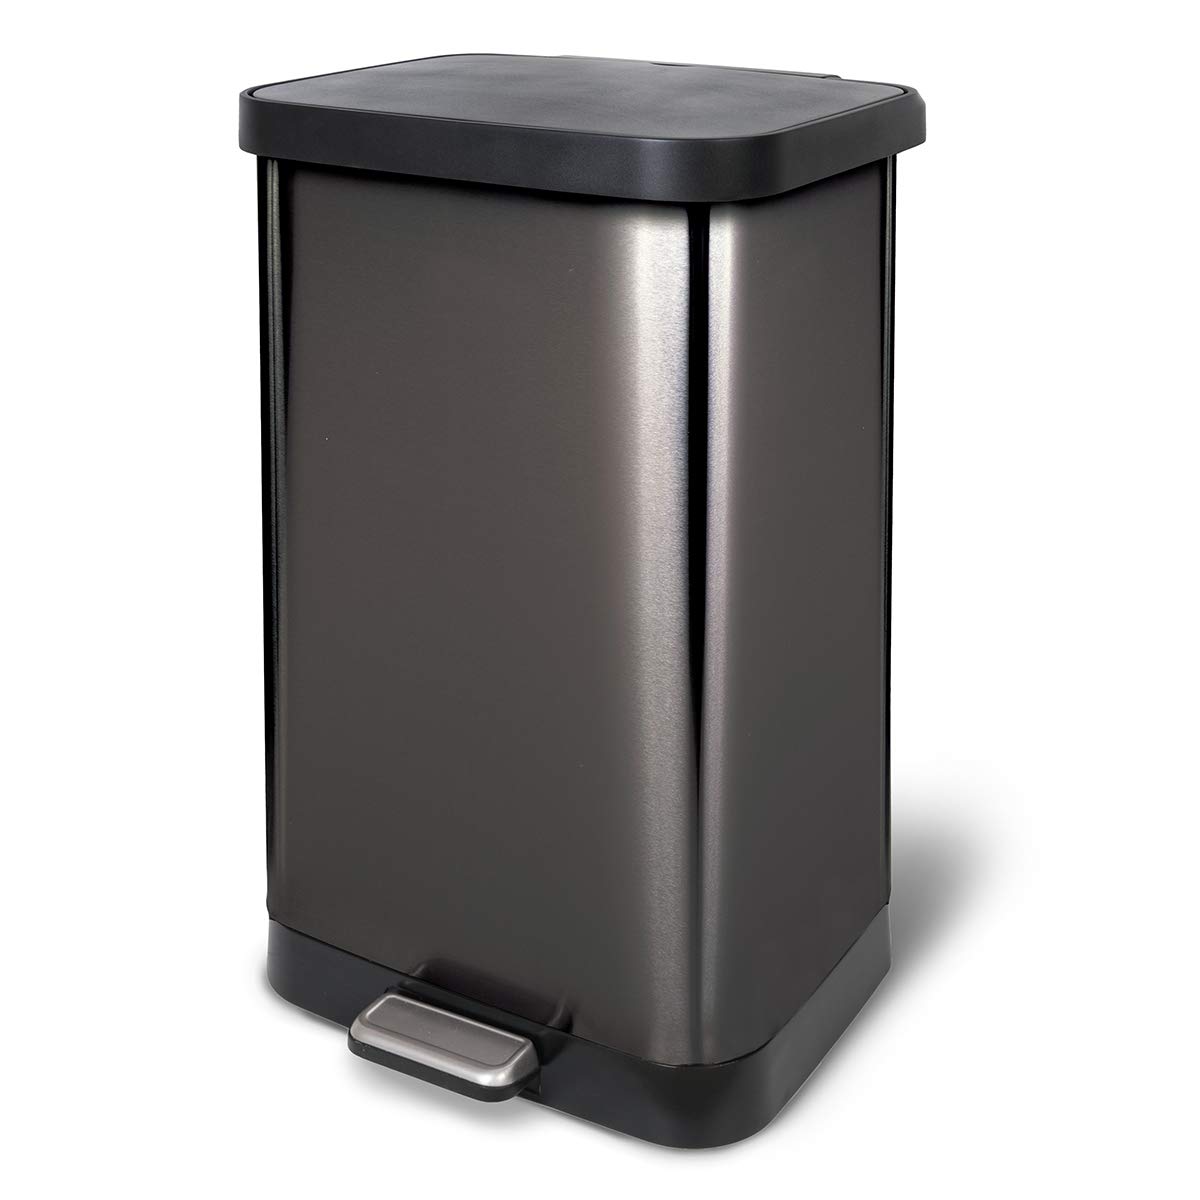 Glad 20 Gallon / 75.5 Liter Extra Capacity Stainless Steel Step Trash Can with CloroxTM Odor Protection